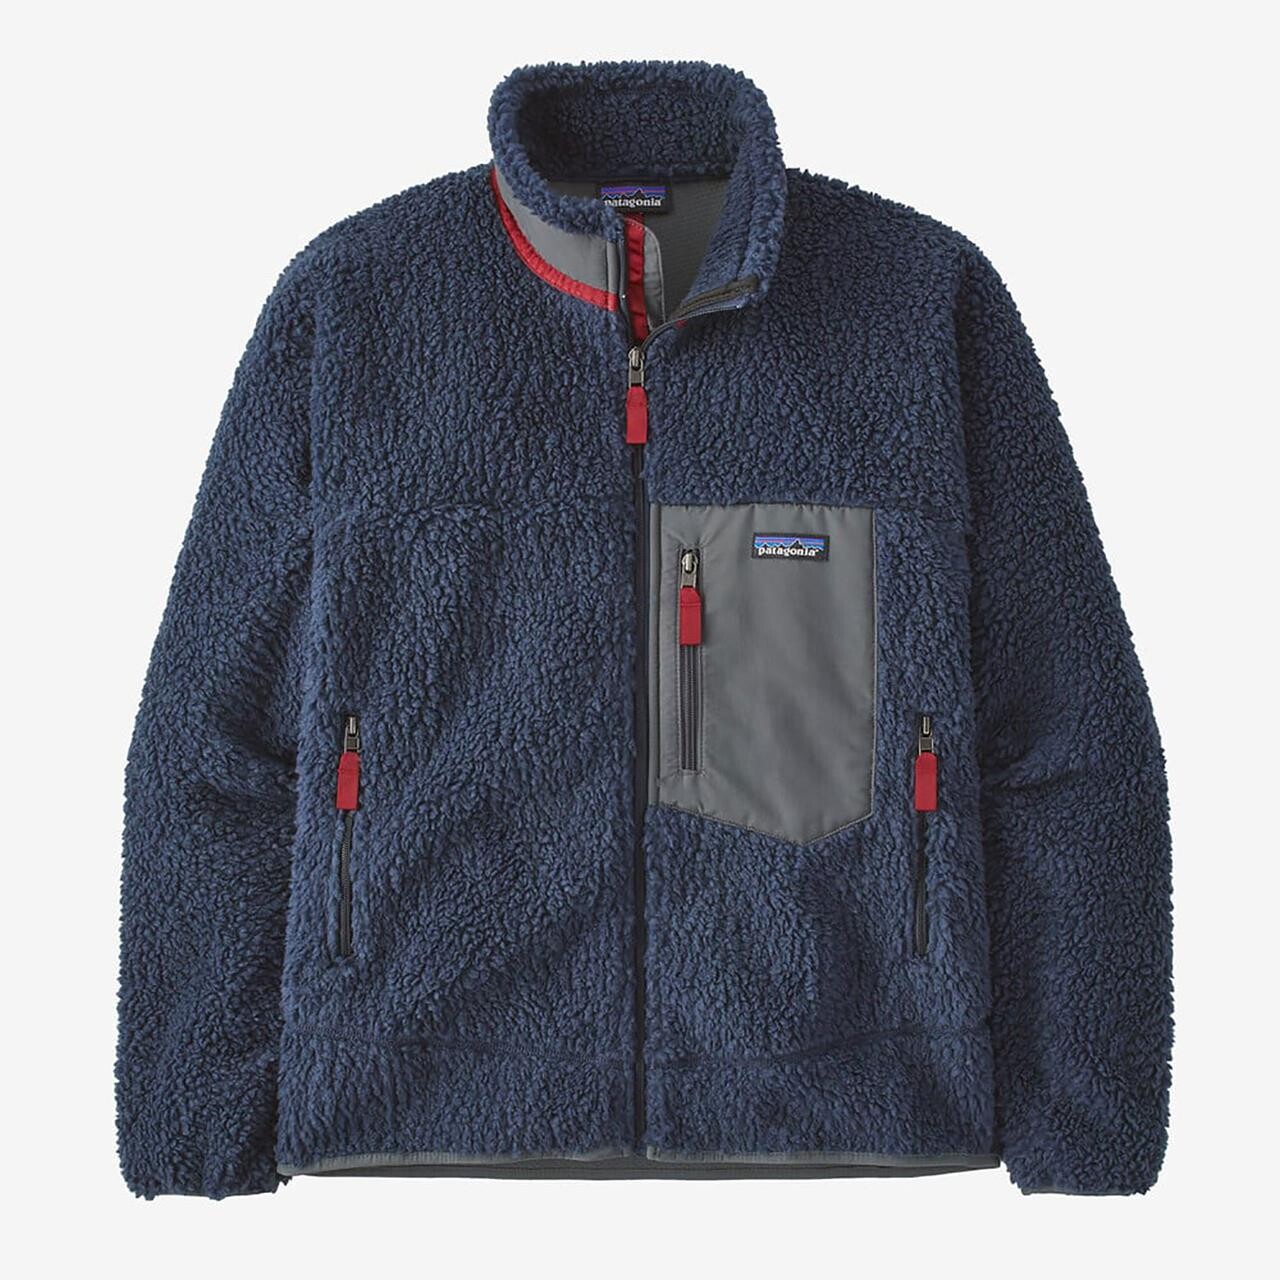 Se Patagonia Mens Classic Retro-X Jacket (Blå (NEW NAVY/WAX RED) Small) hos Friluftsland.dk